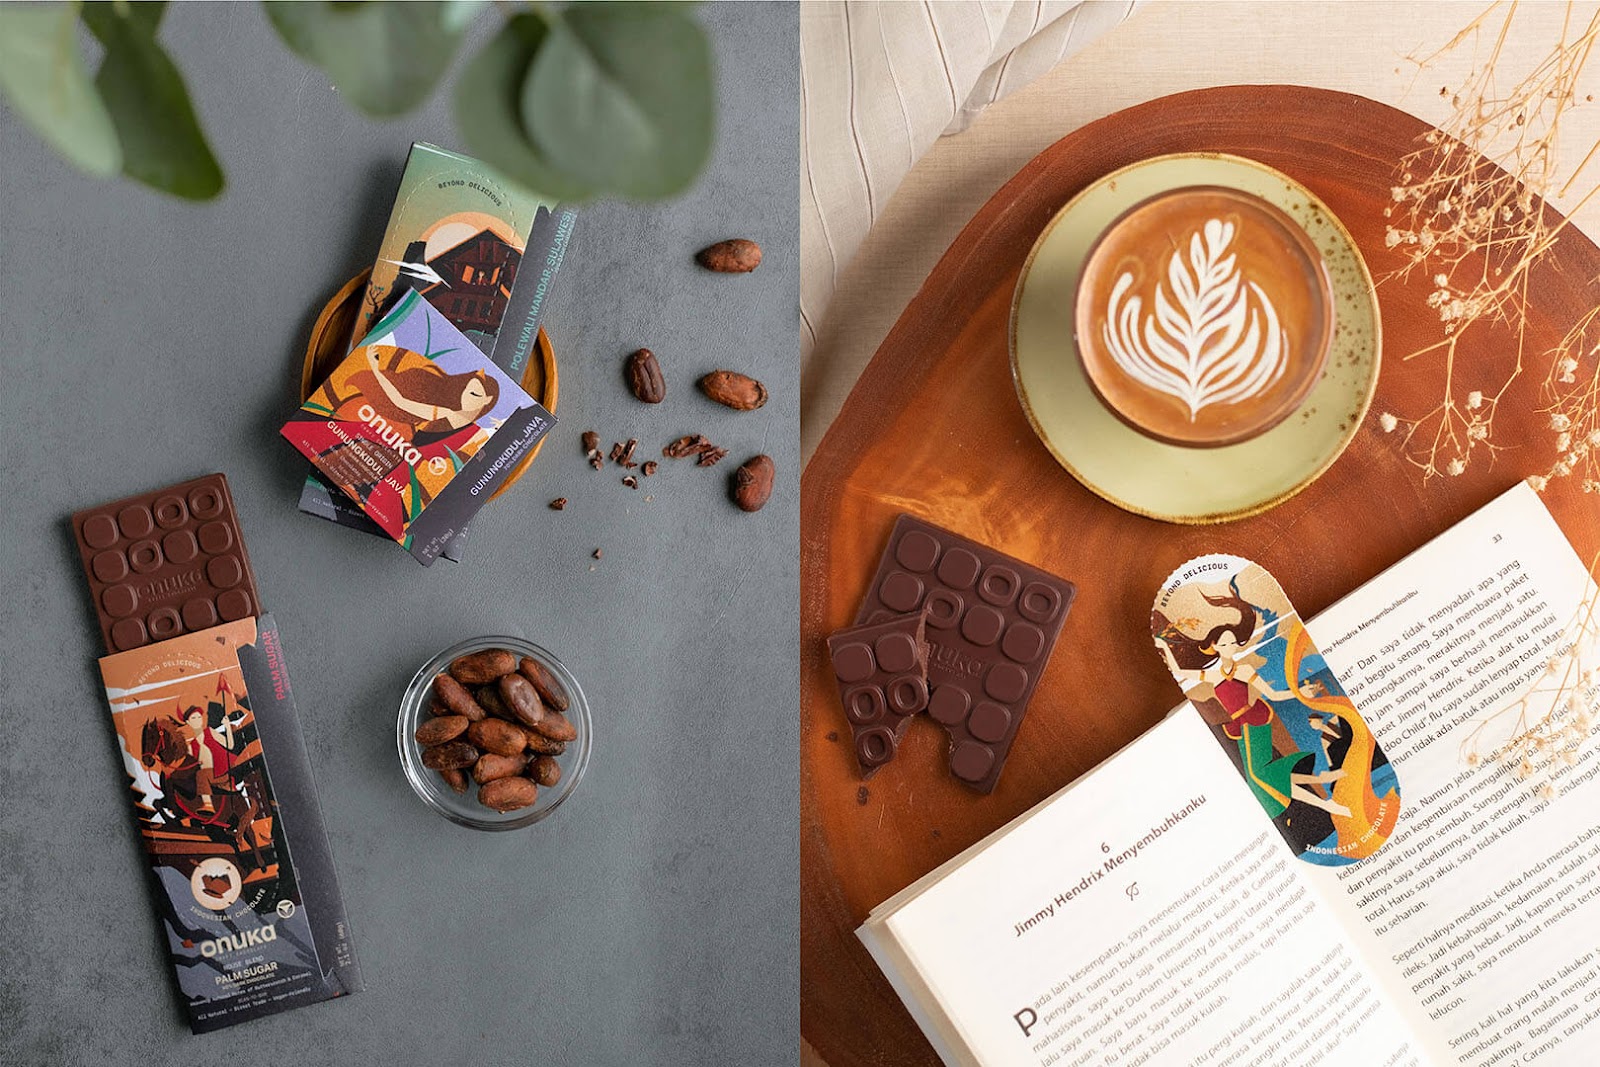 Branding, illustration and packaging design artifacts for Onuka chocolate created by EGGHEAD Branding Agency